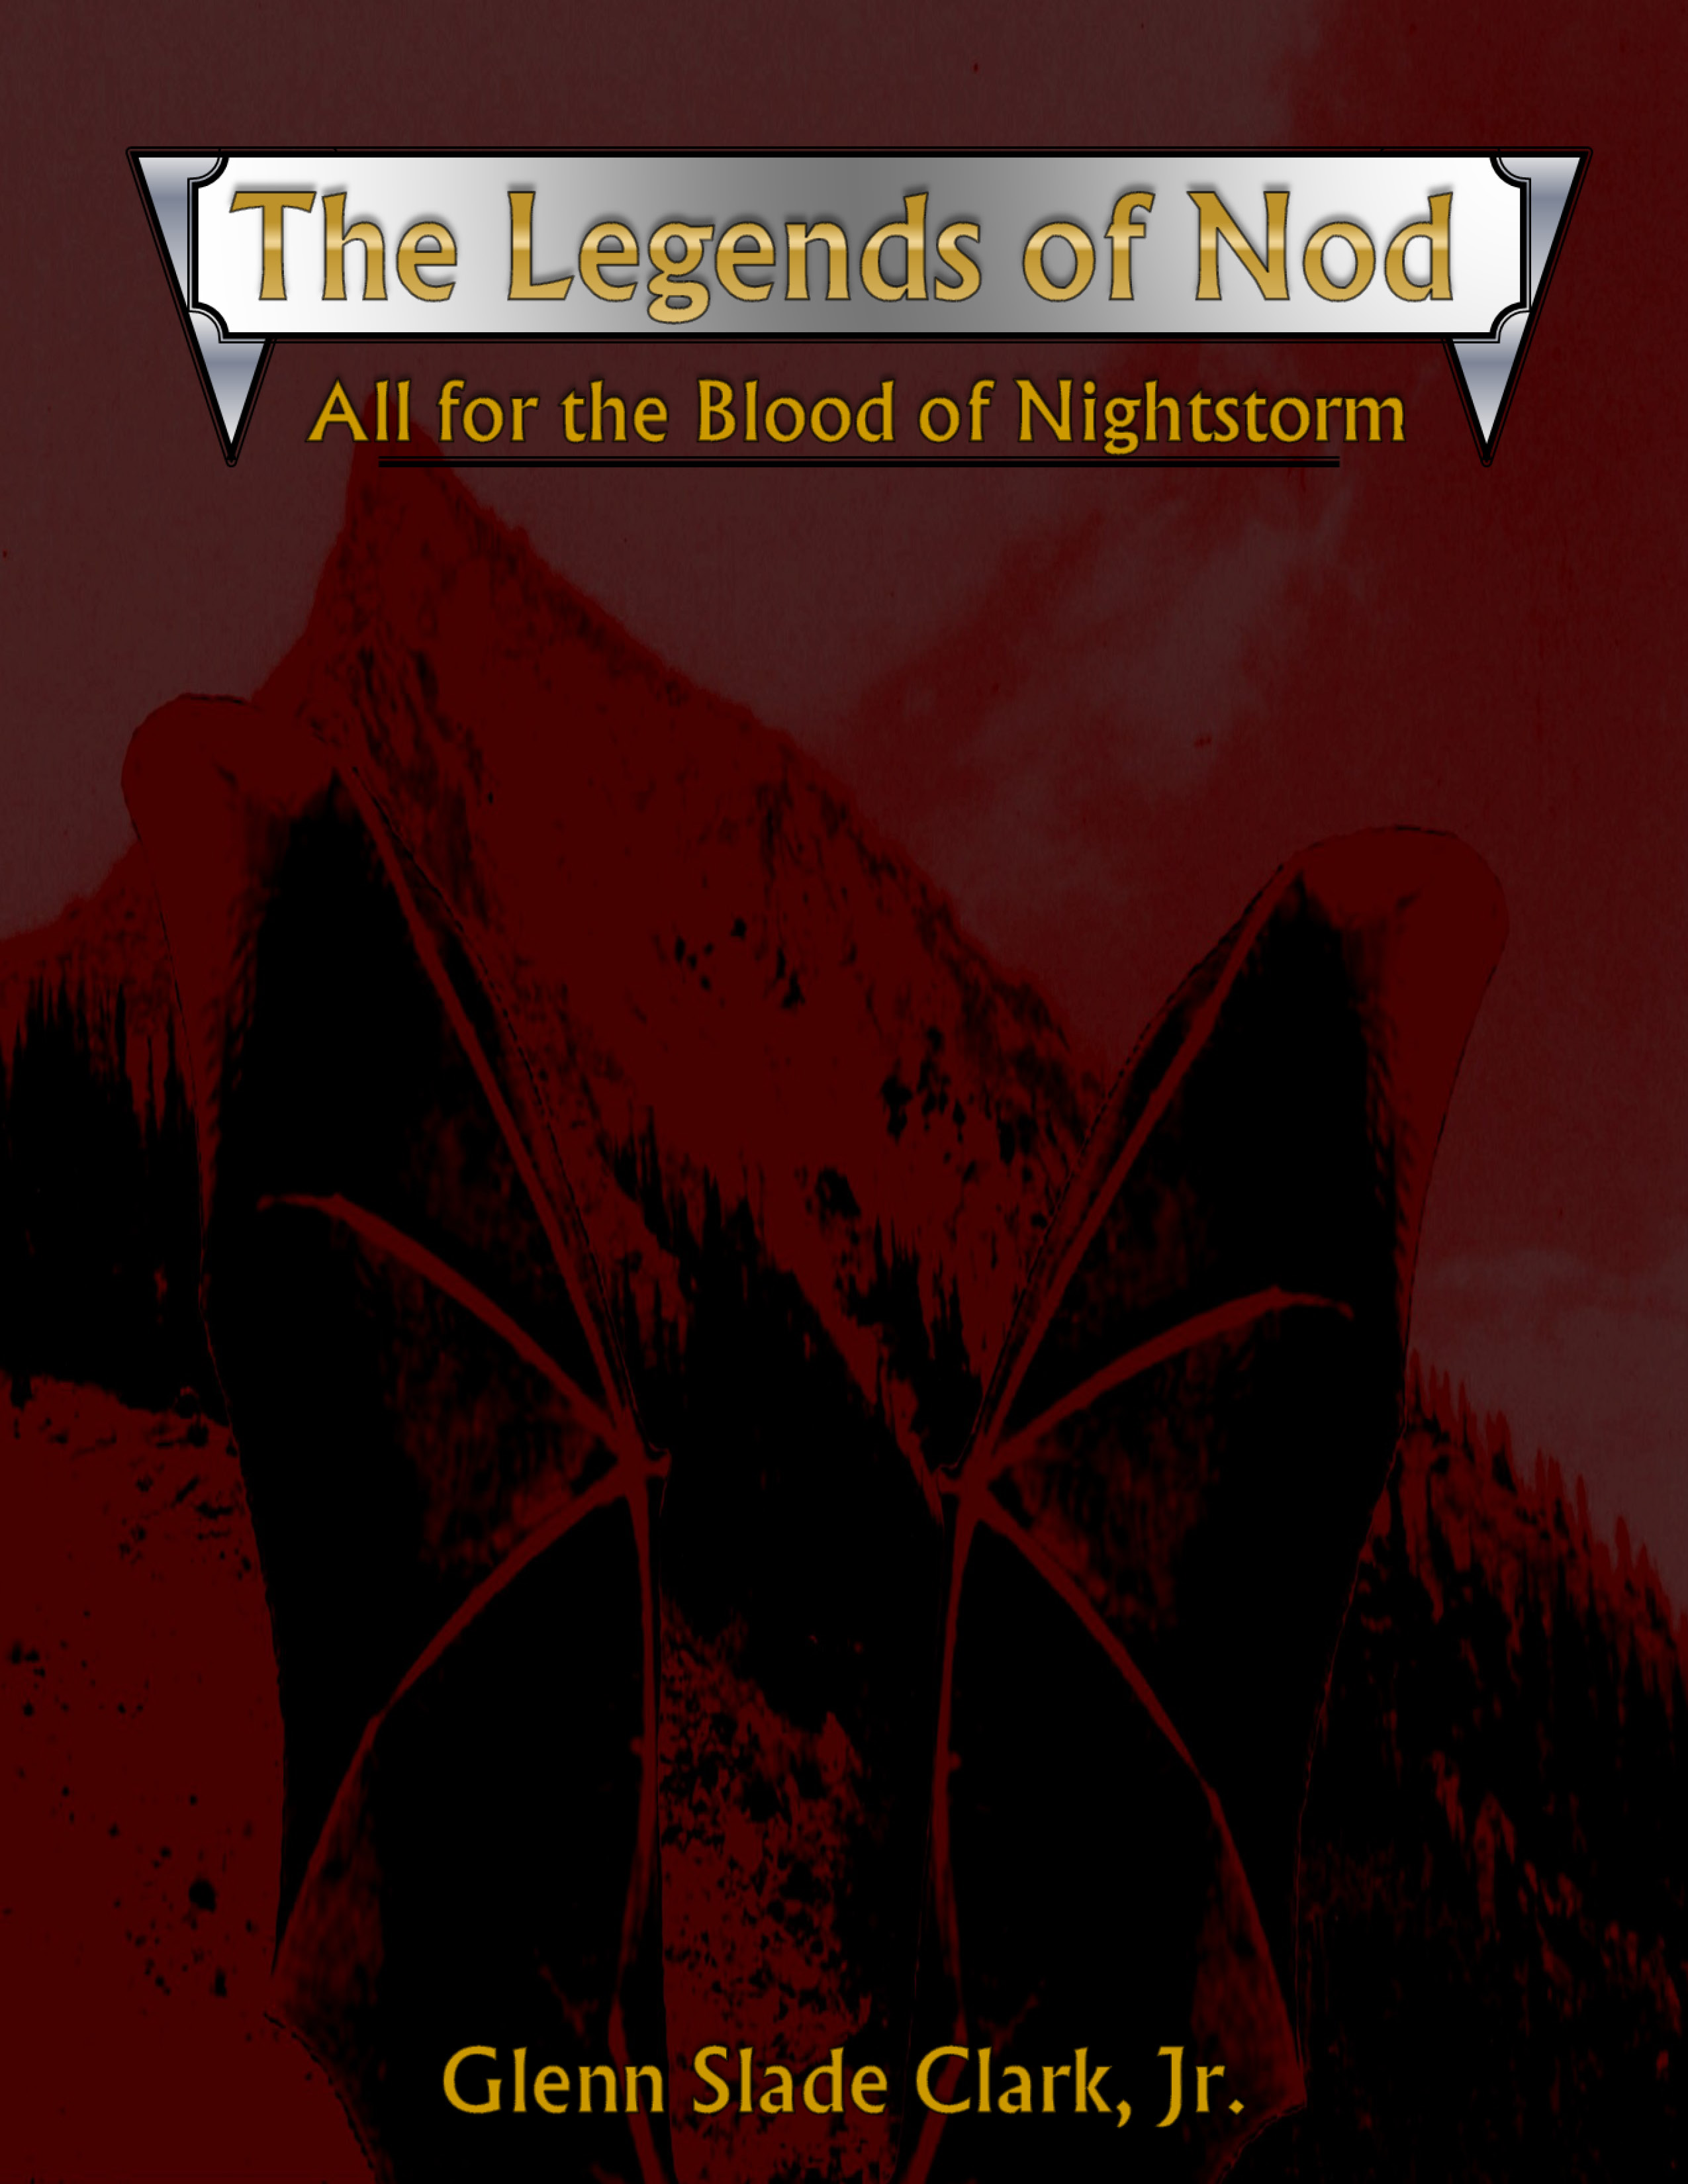 All for the Blood of Nightstorm